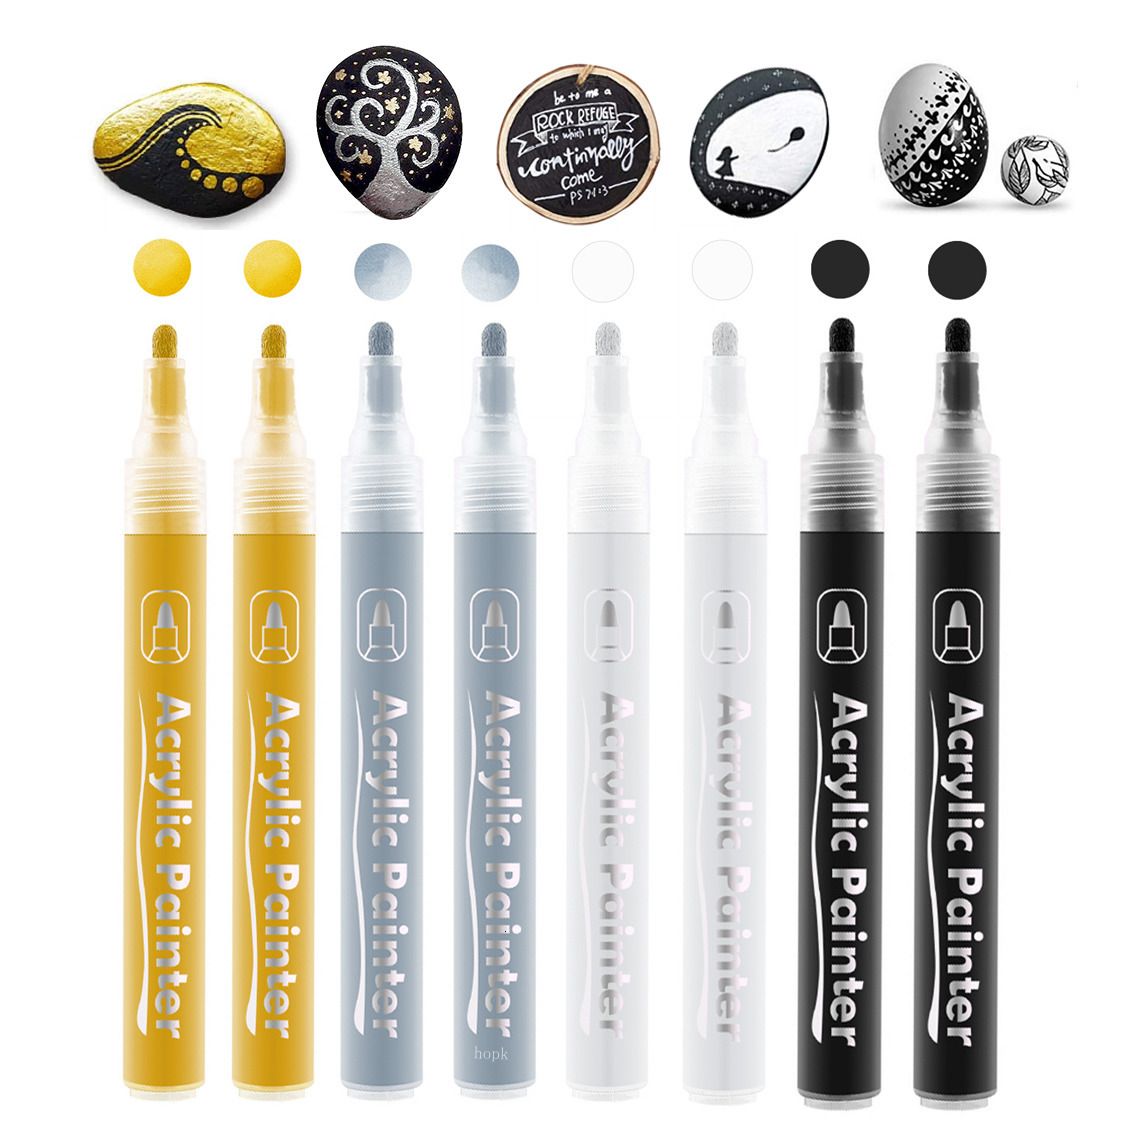 Wholesale Markers 8Packset Black White Acrylic Paint Markers Pens For Rock  Painting Stone Canvas Glass Metallic Ceramic Paper Drawing Water Based  230807 From Dao09, $9.87